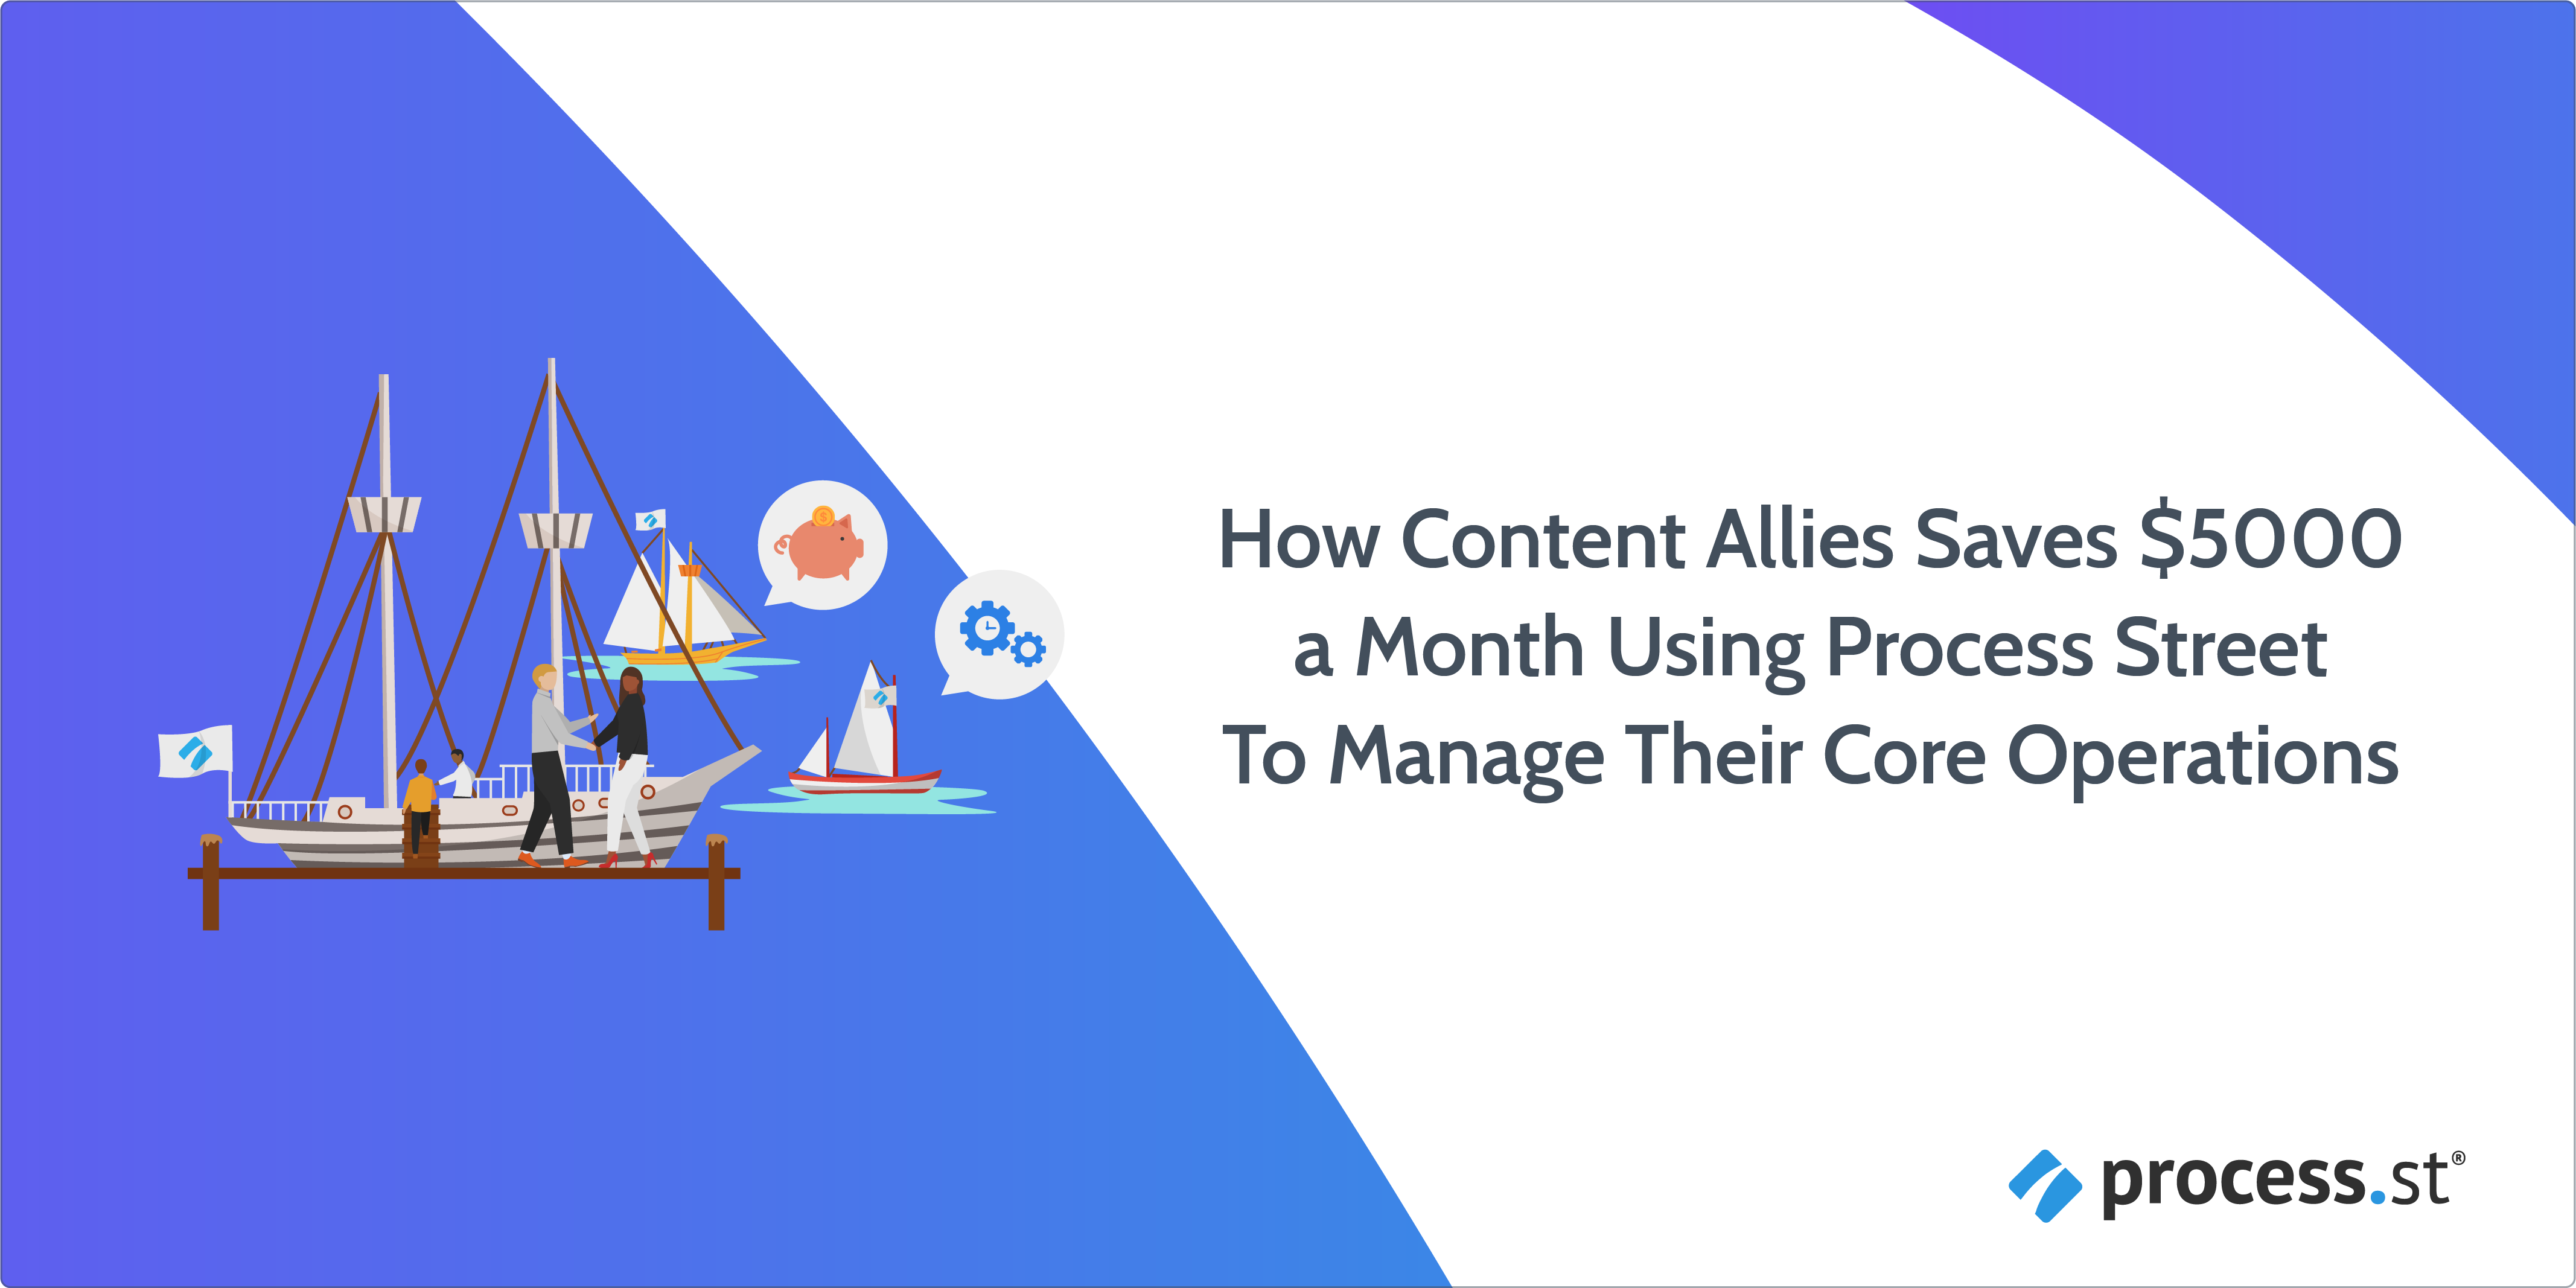 How Content Allies Saves $5000 a Month Using Process Street-01 (1)